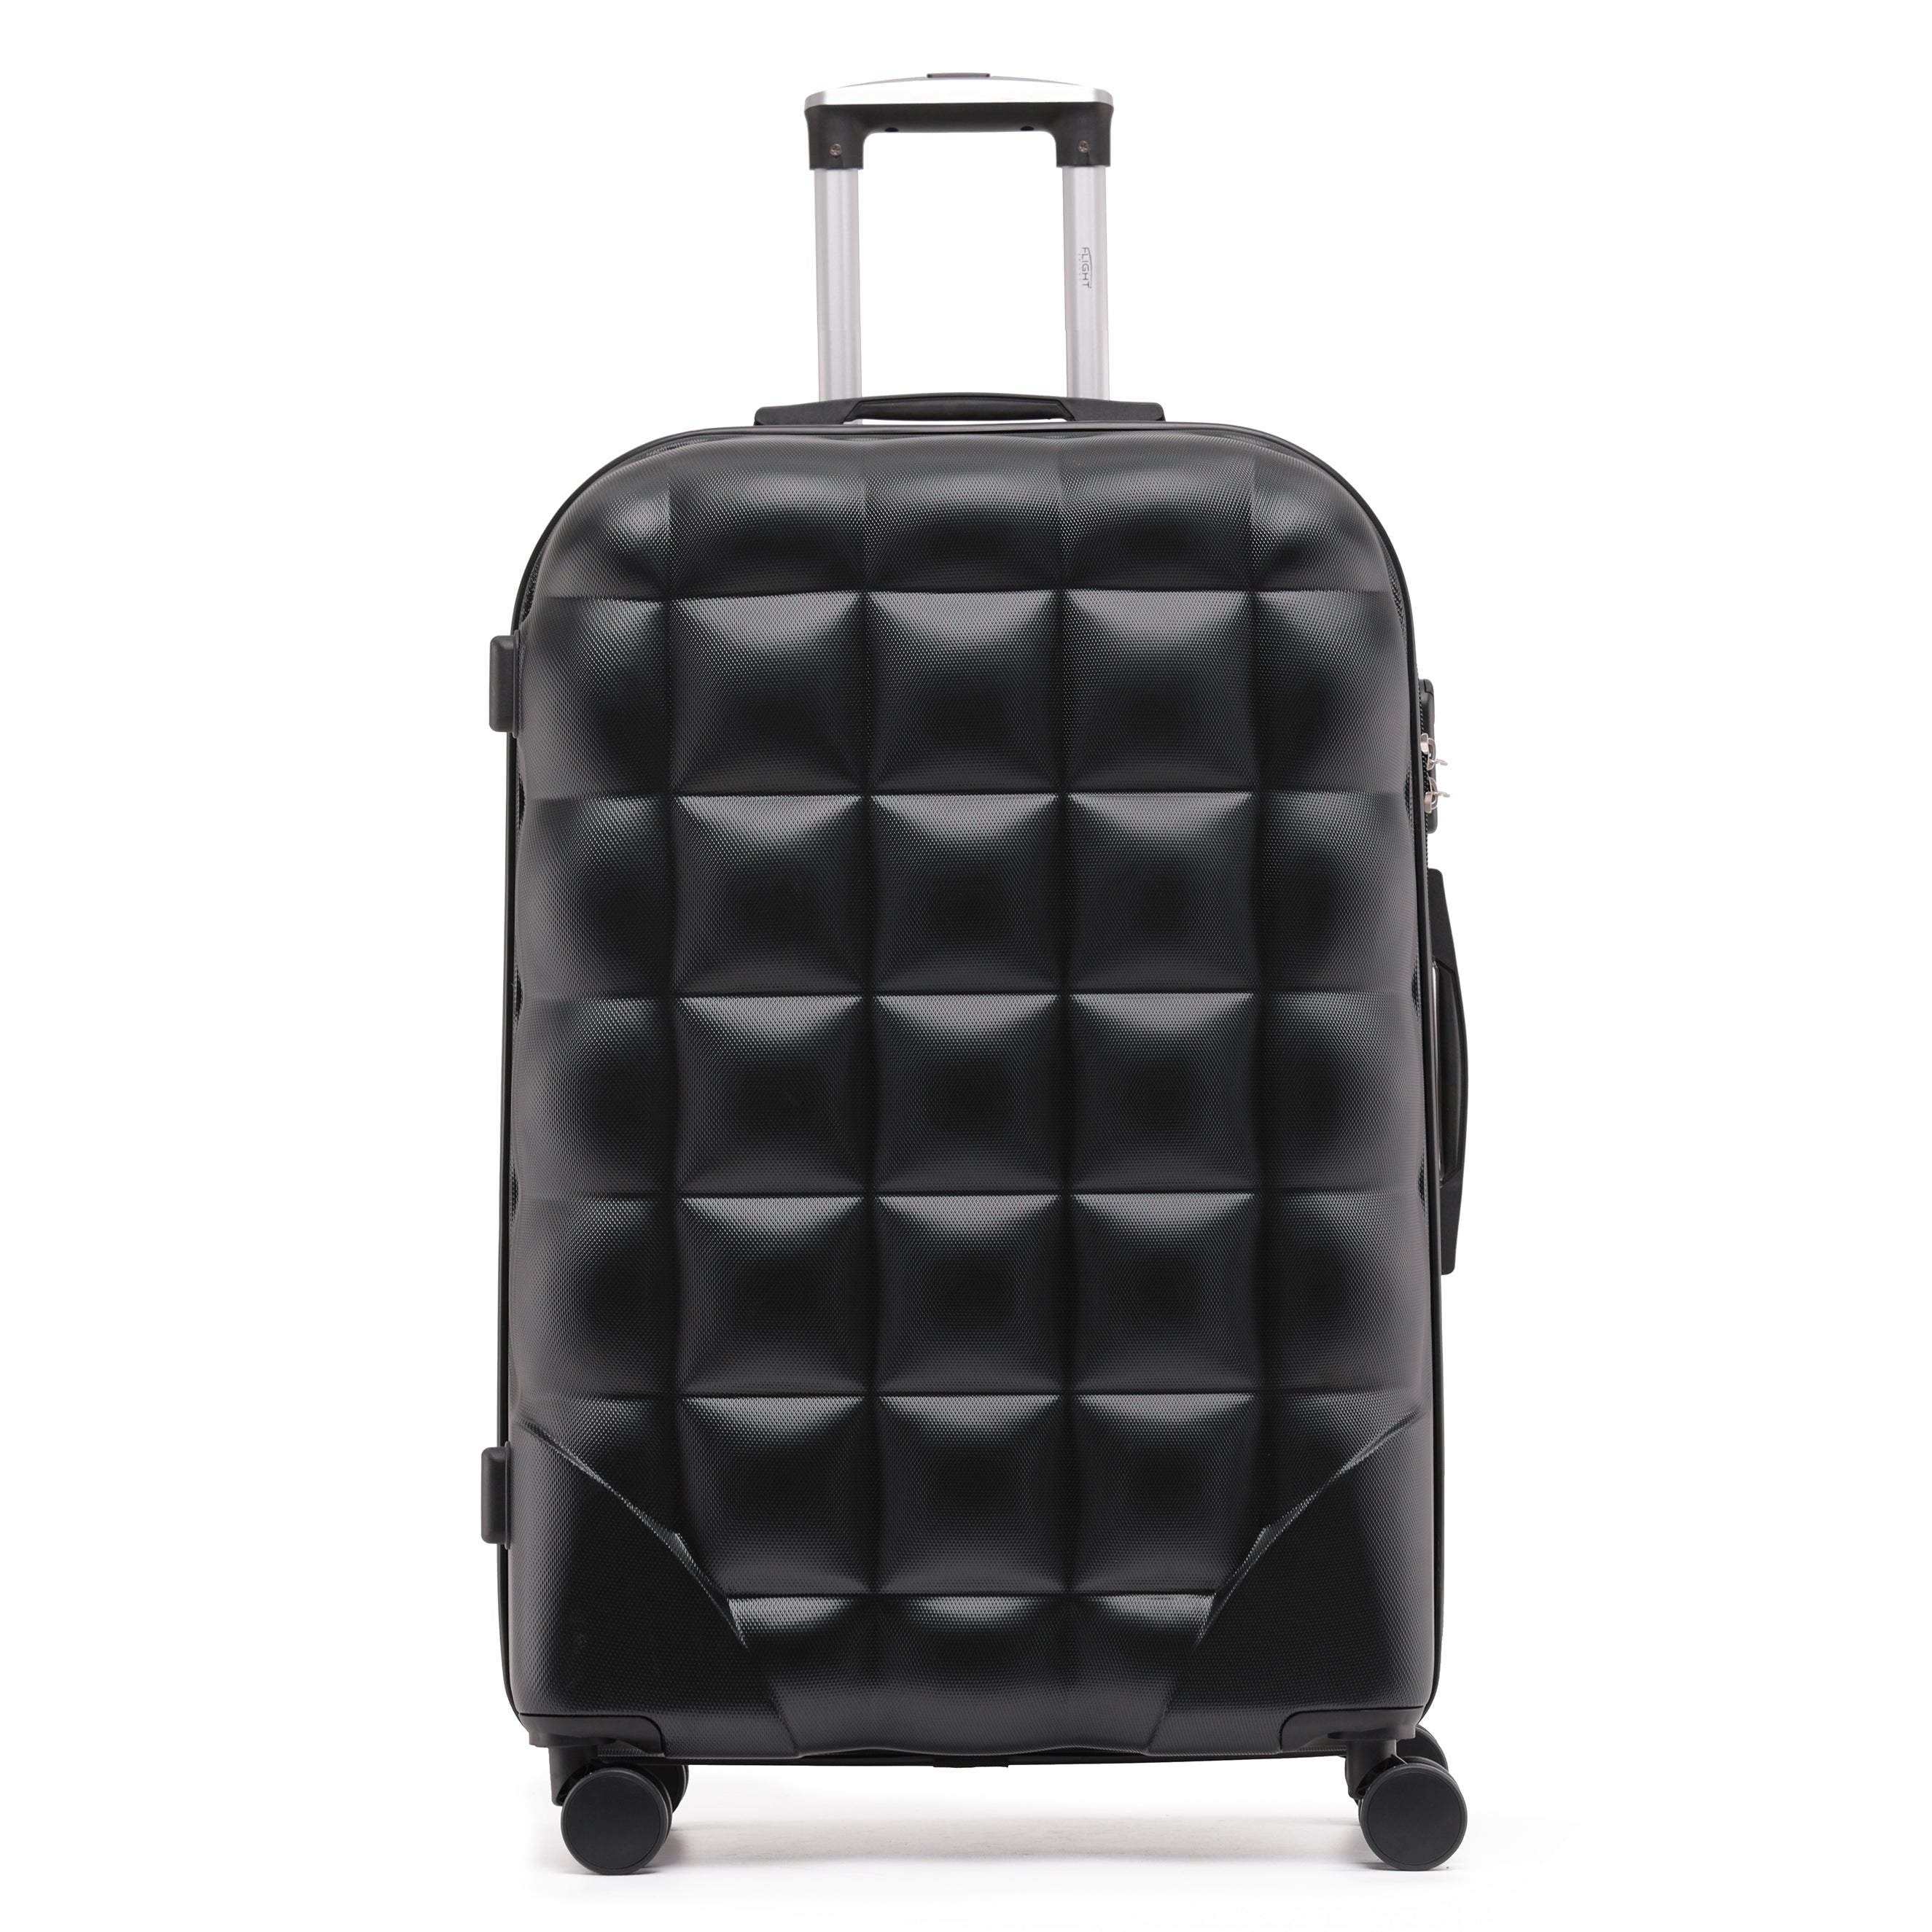 Load image into Gallery viewer, Bubble Suitcase Ryanair easyJet Jet2 Approved Hardcase Suitcases Size Options
